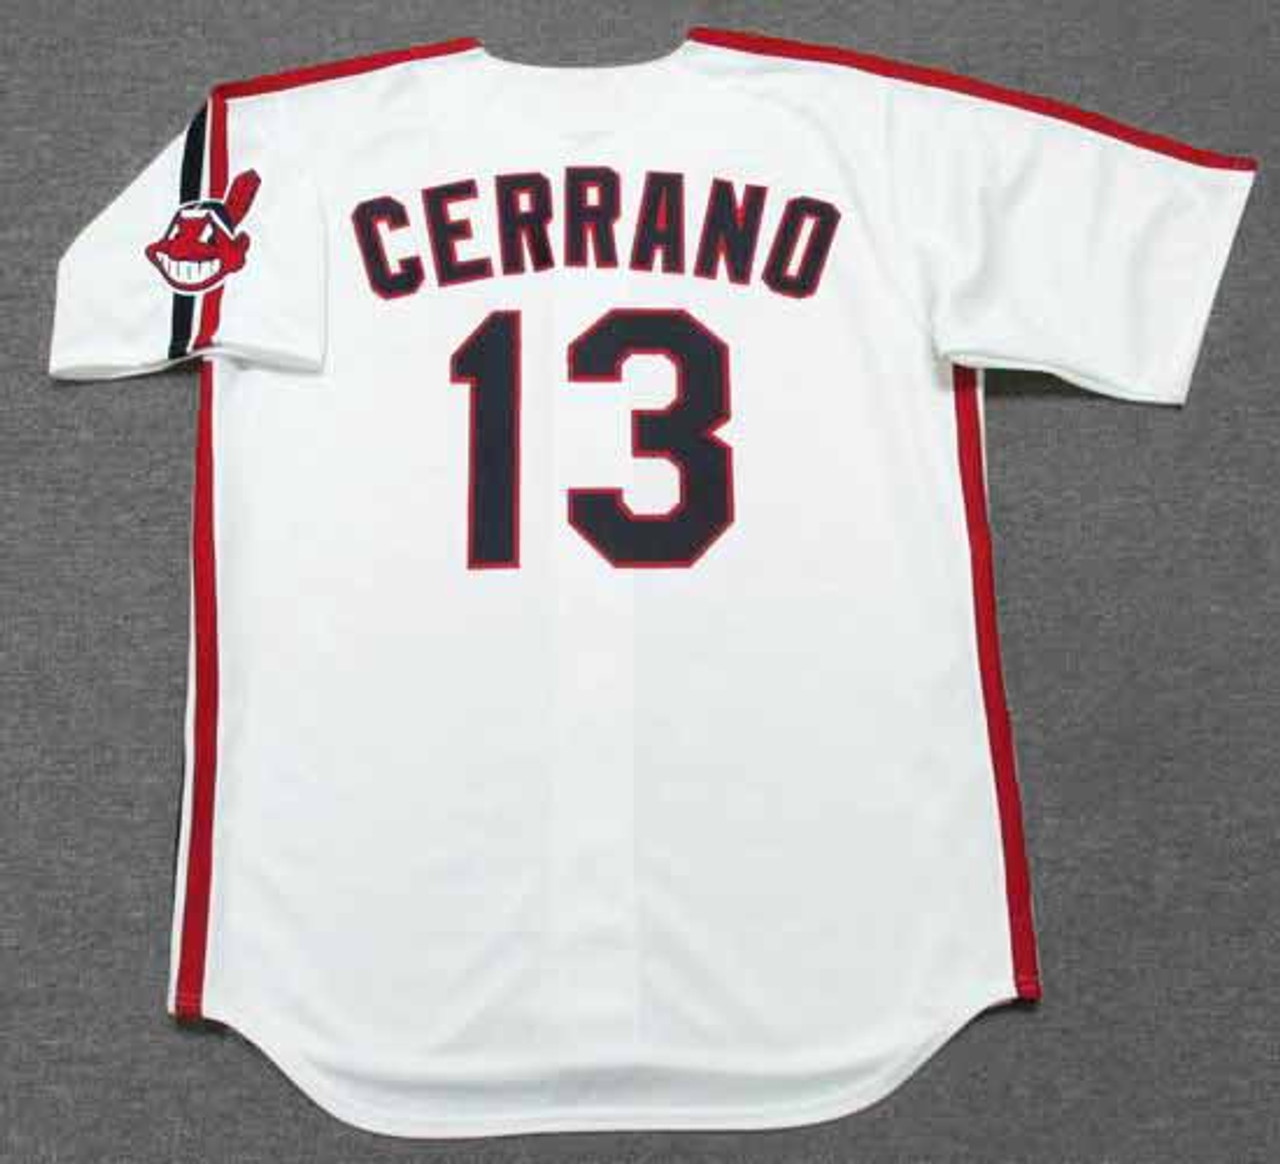 Not in Hall of Fame - Pedro Cerrano